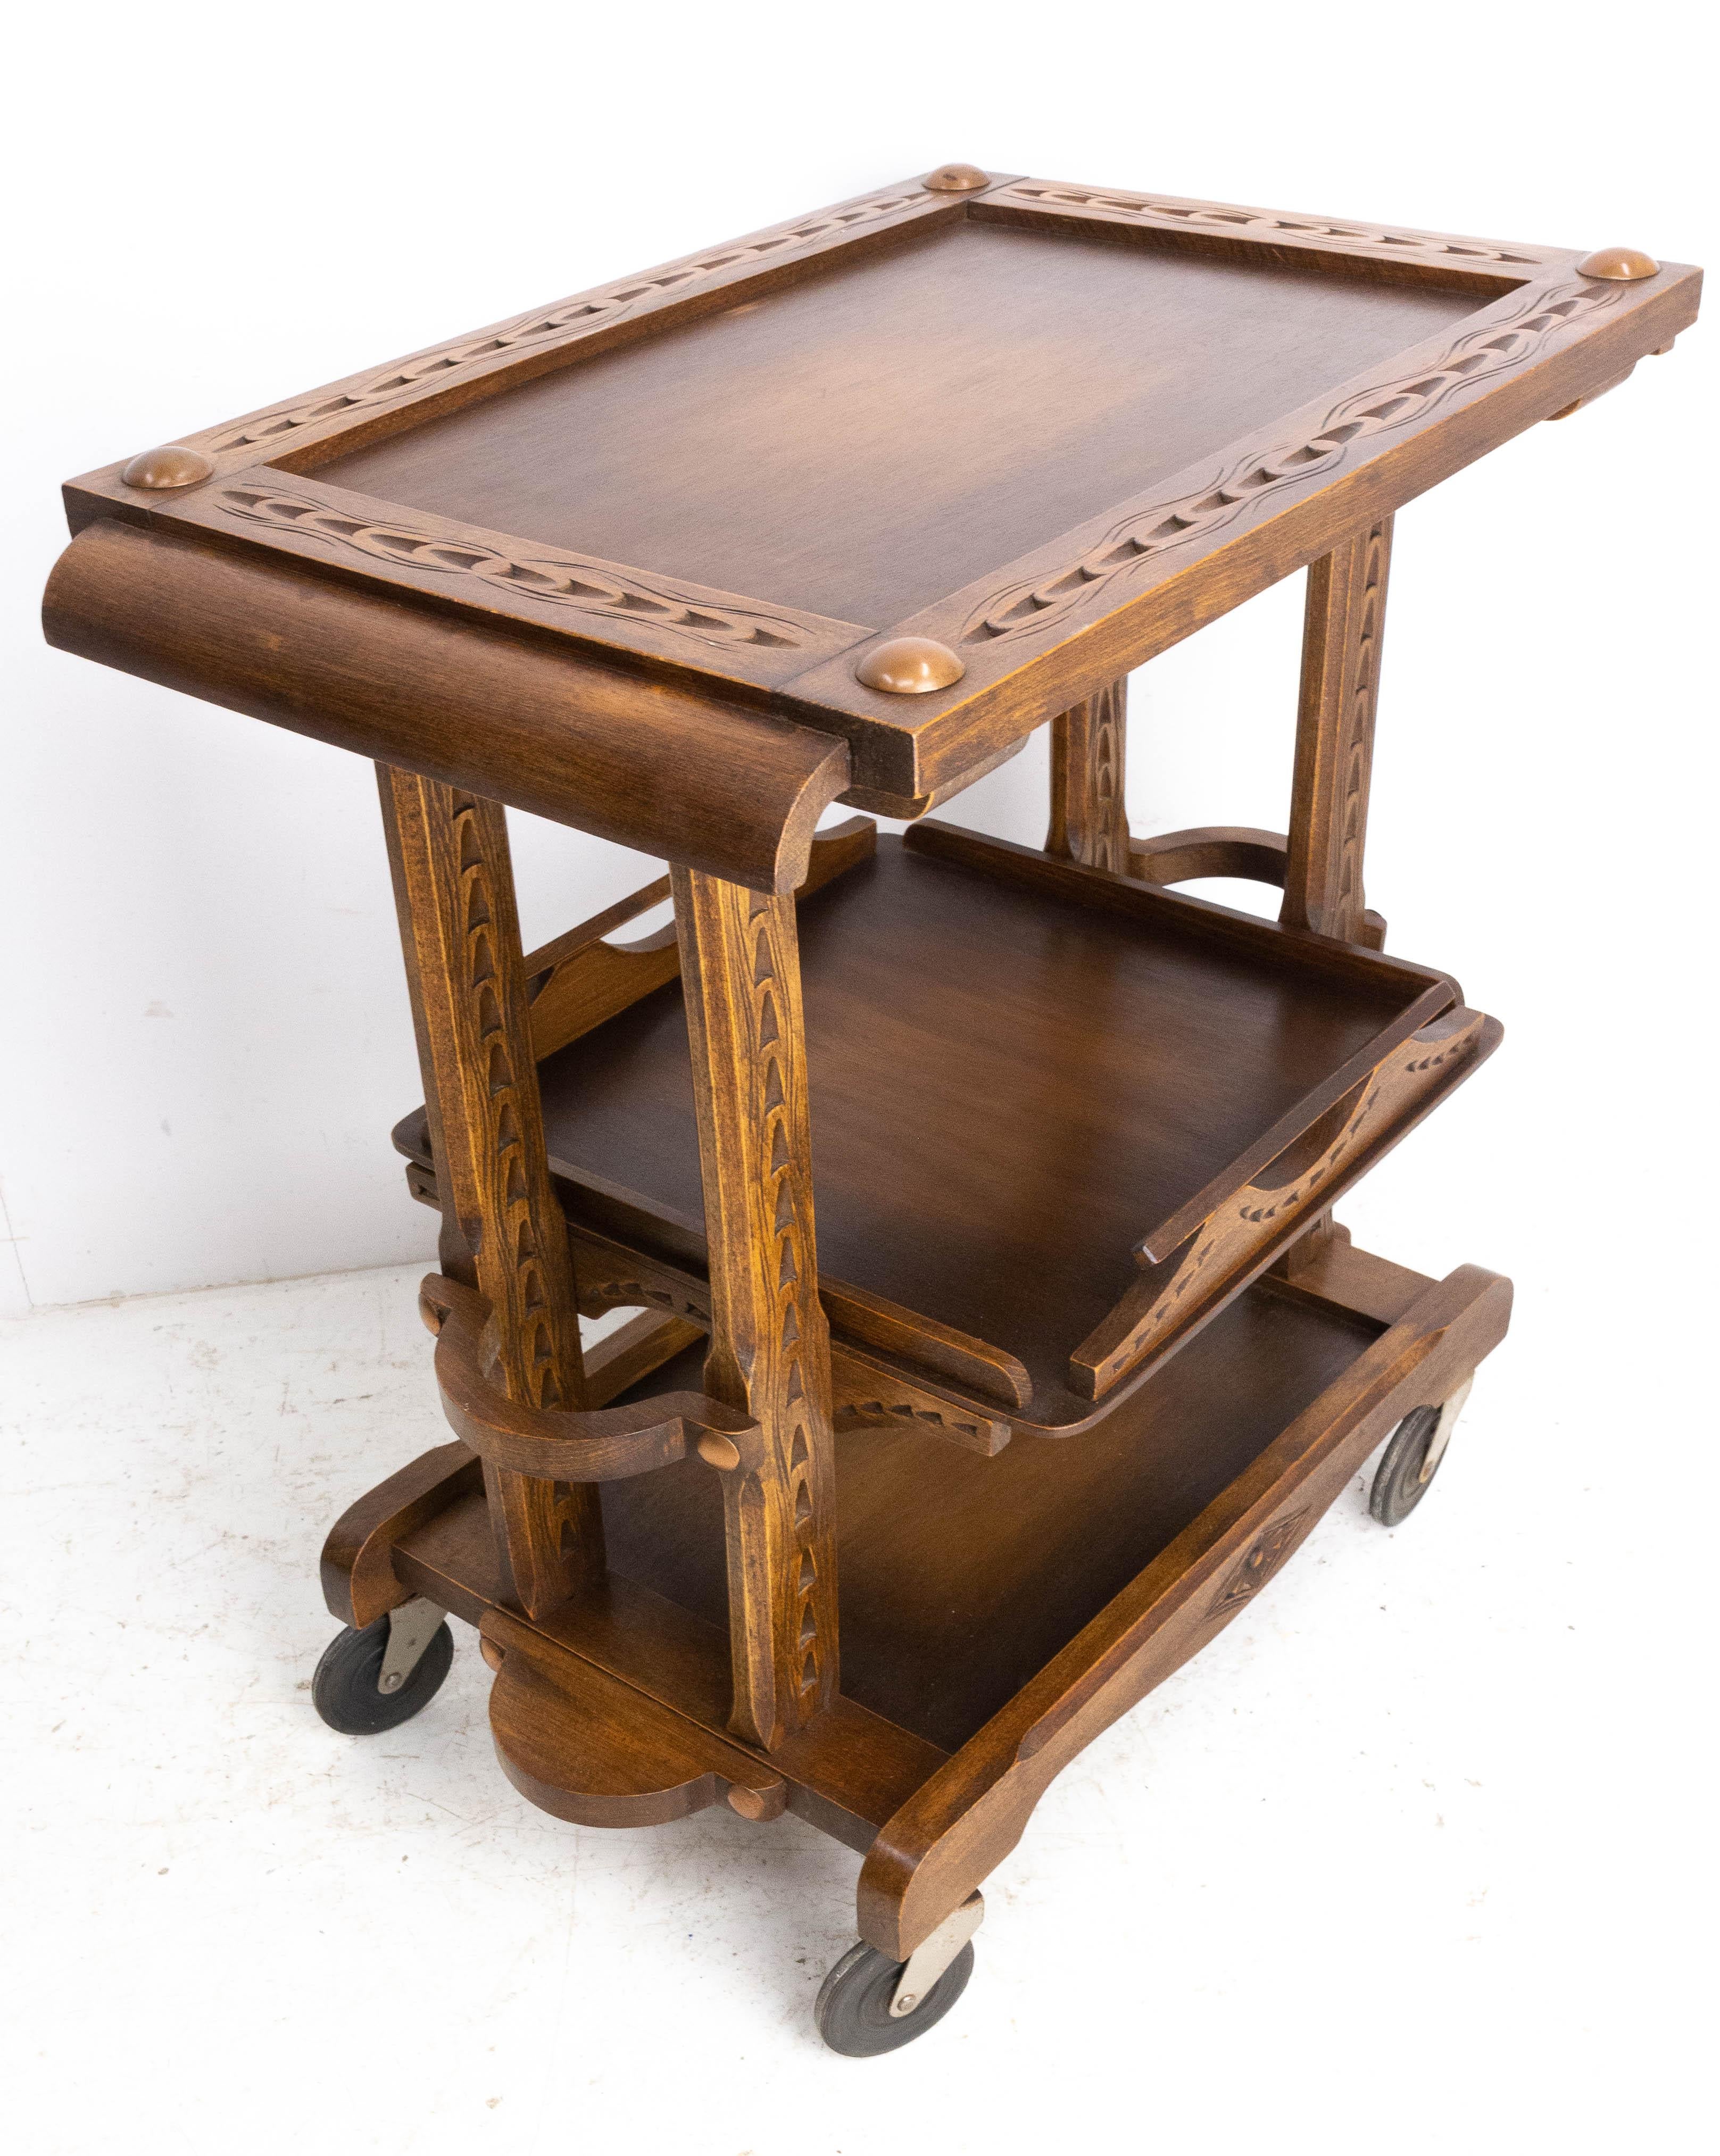 20th Century Poplar Cart Drinks Cocktail Table Trolley Three Trays on Wheels, France C. 1940 For Sale